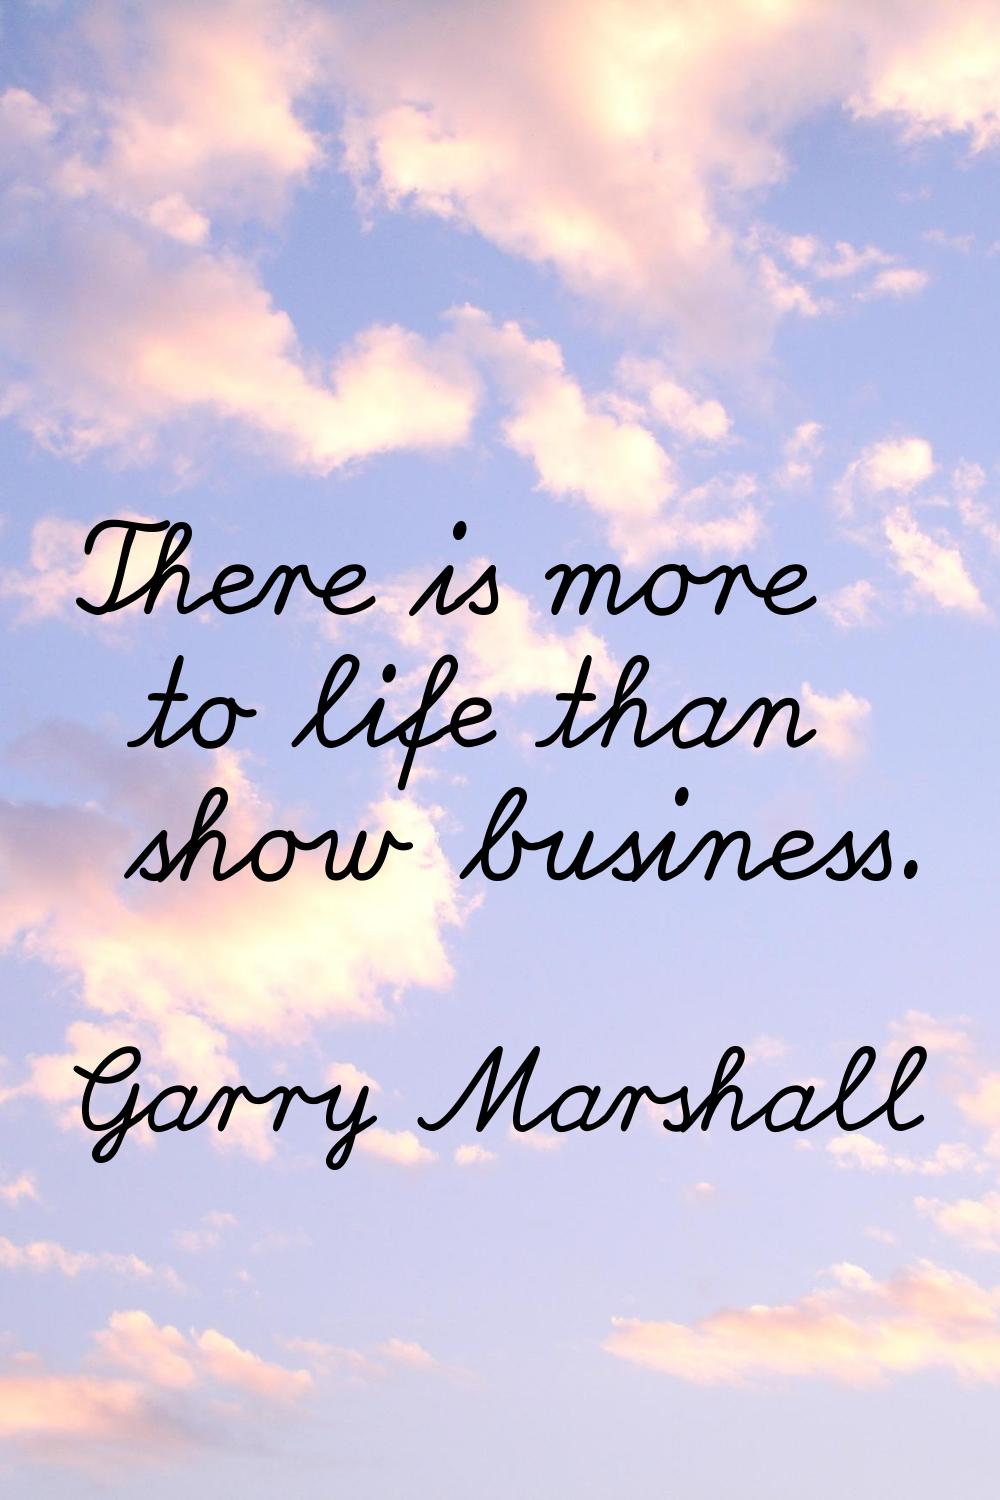 There is more to life than show business.